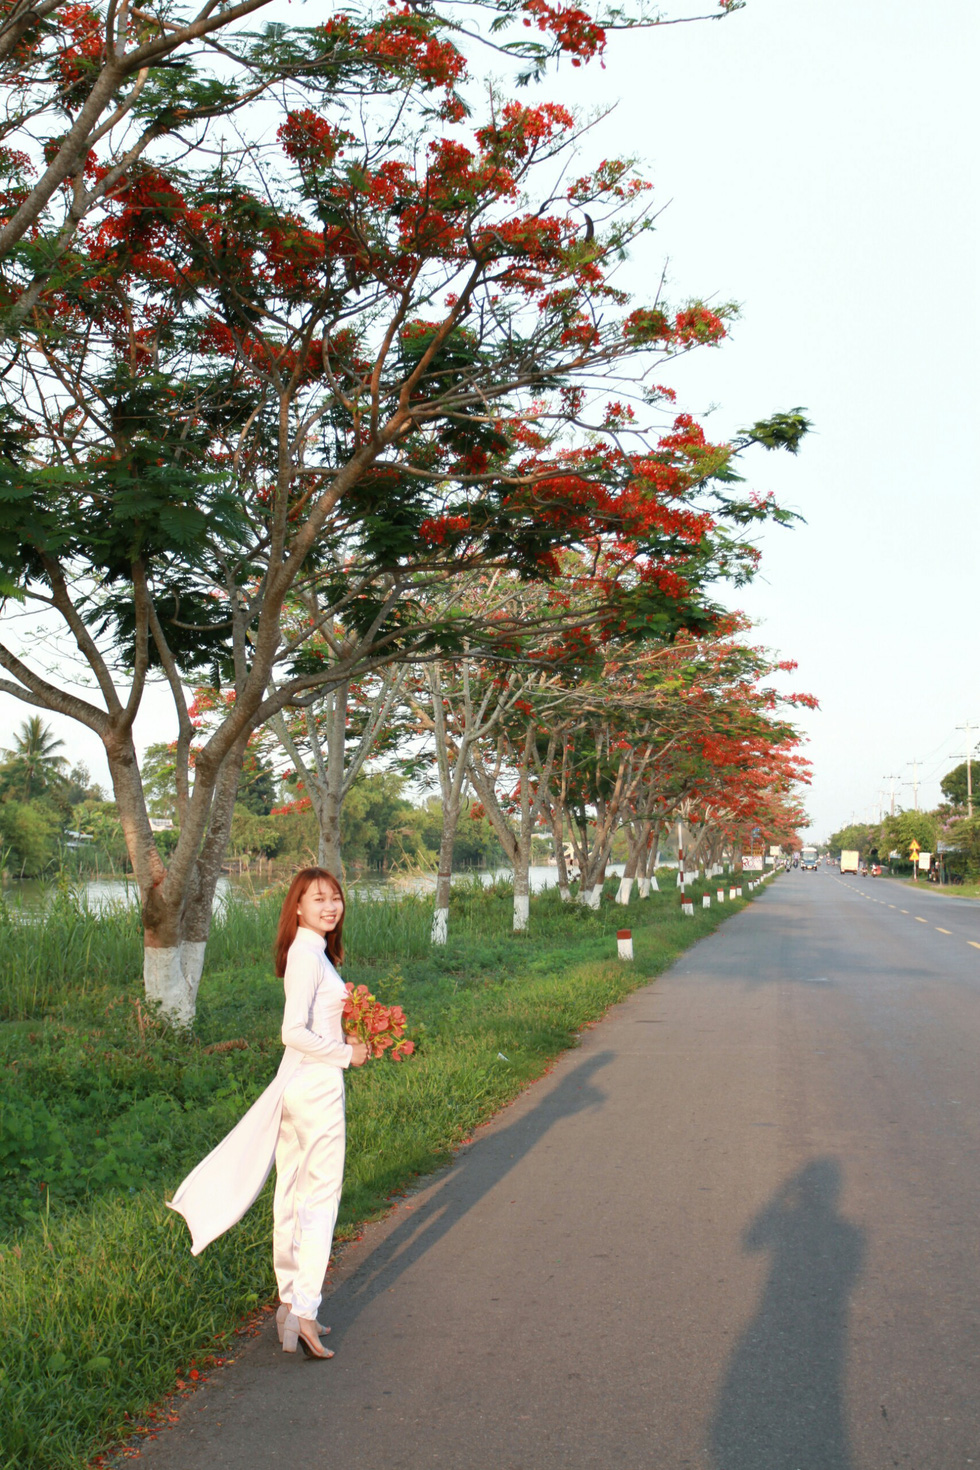 A young student in ao dai poses under red flamboyant flowers in Dong Thap Province, southern Vietnam. Photo: Tuoi Tre